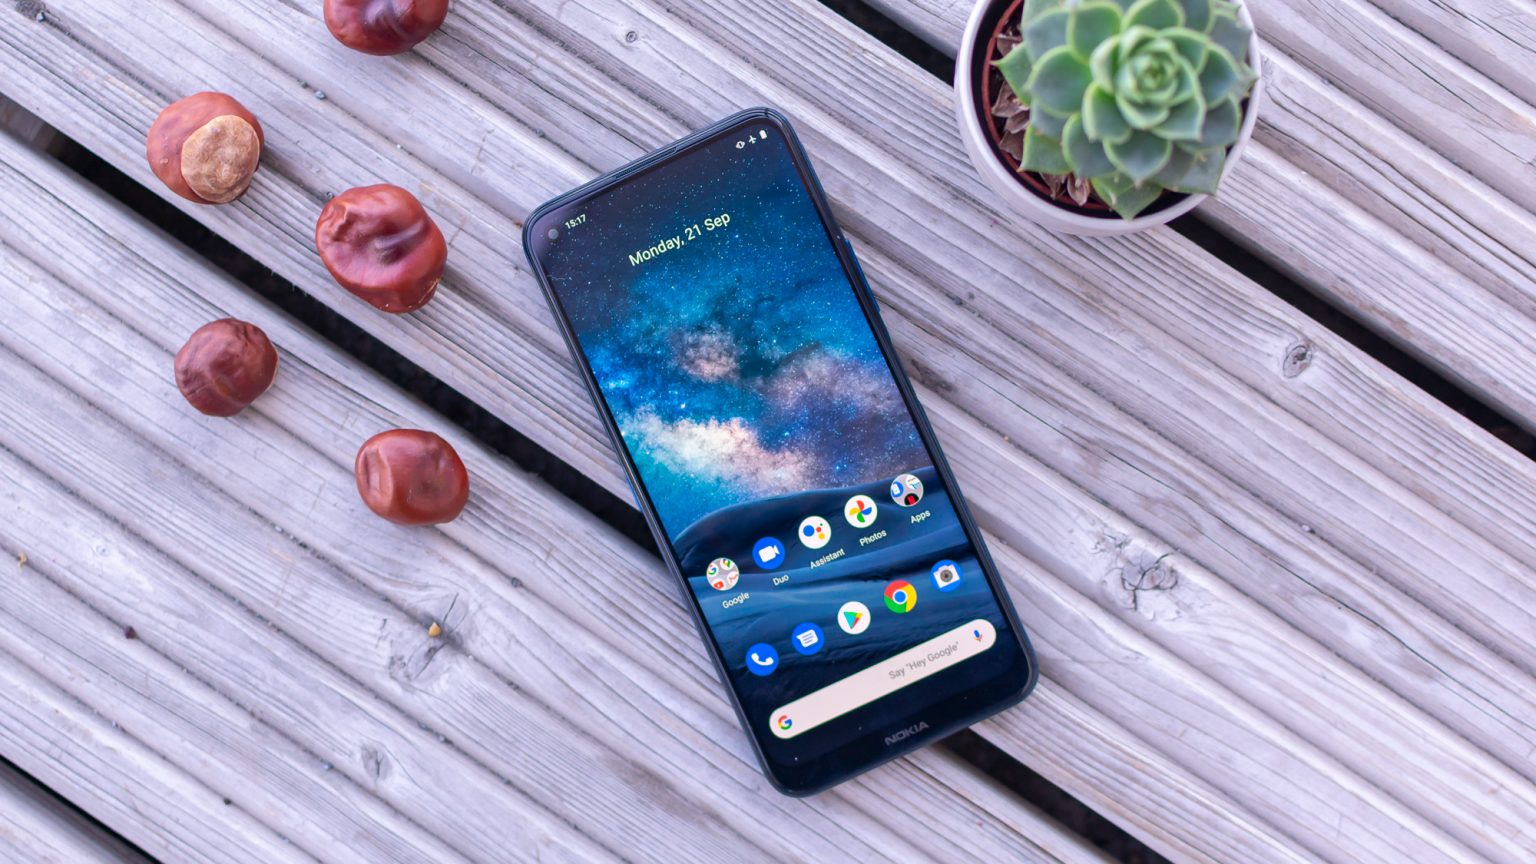 nokia 8.3 5g review 1536x864 - Nokia 8.3 5G Price In Nigeria & Full Review